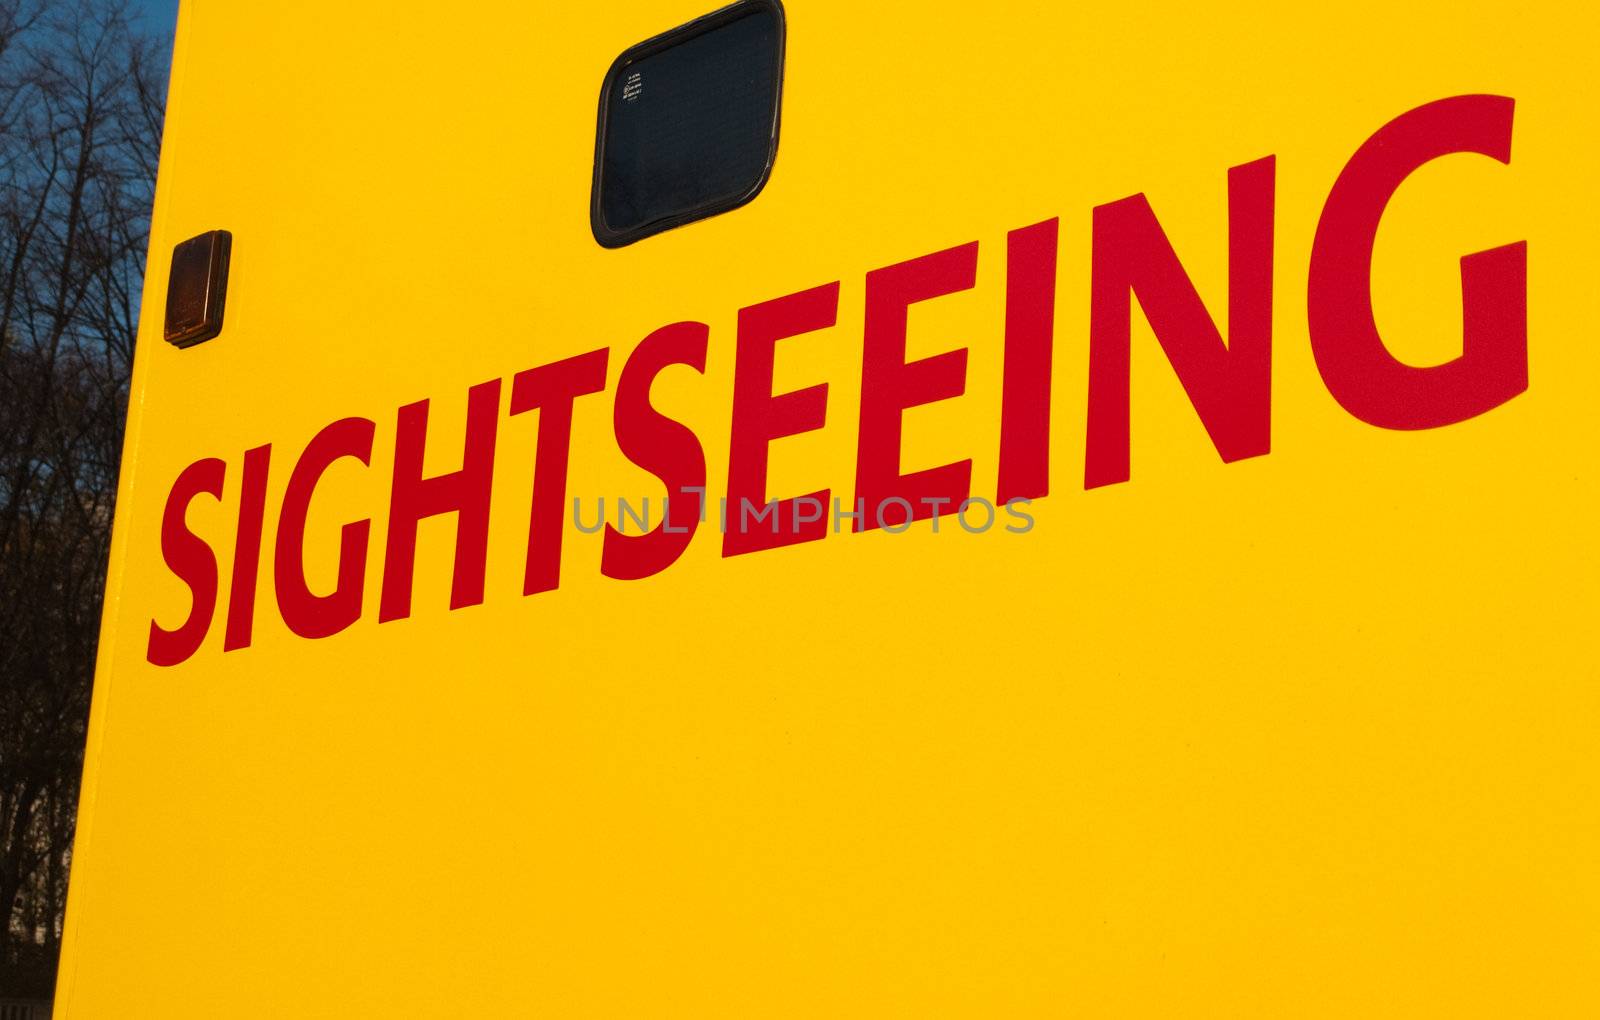 Sightseeing writing on Yellow Tourist Tour Bus in Red Text